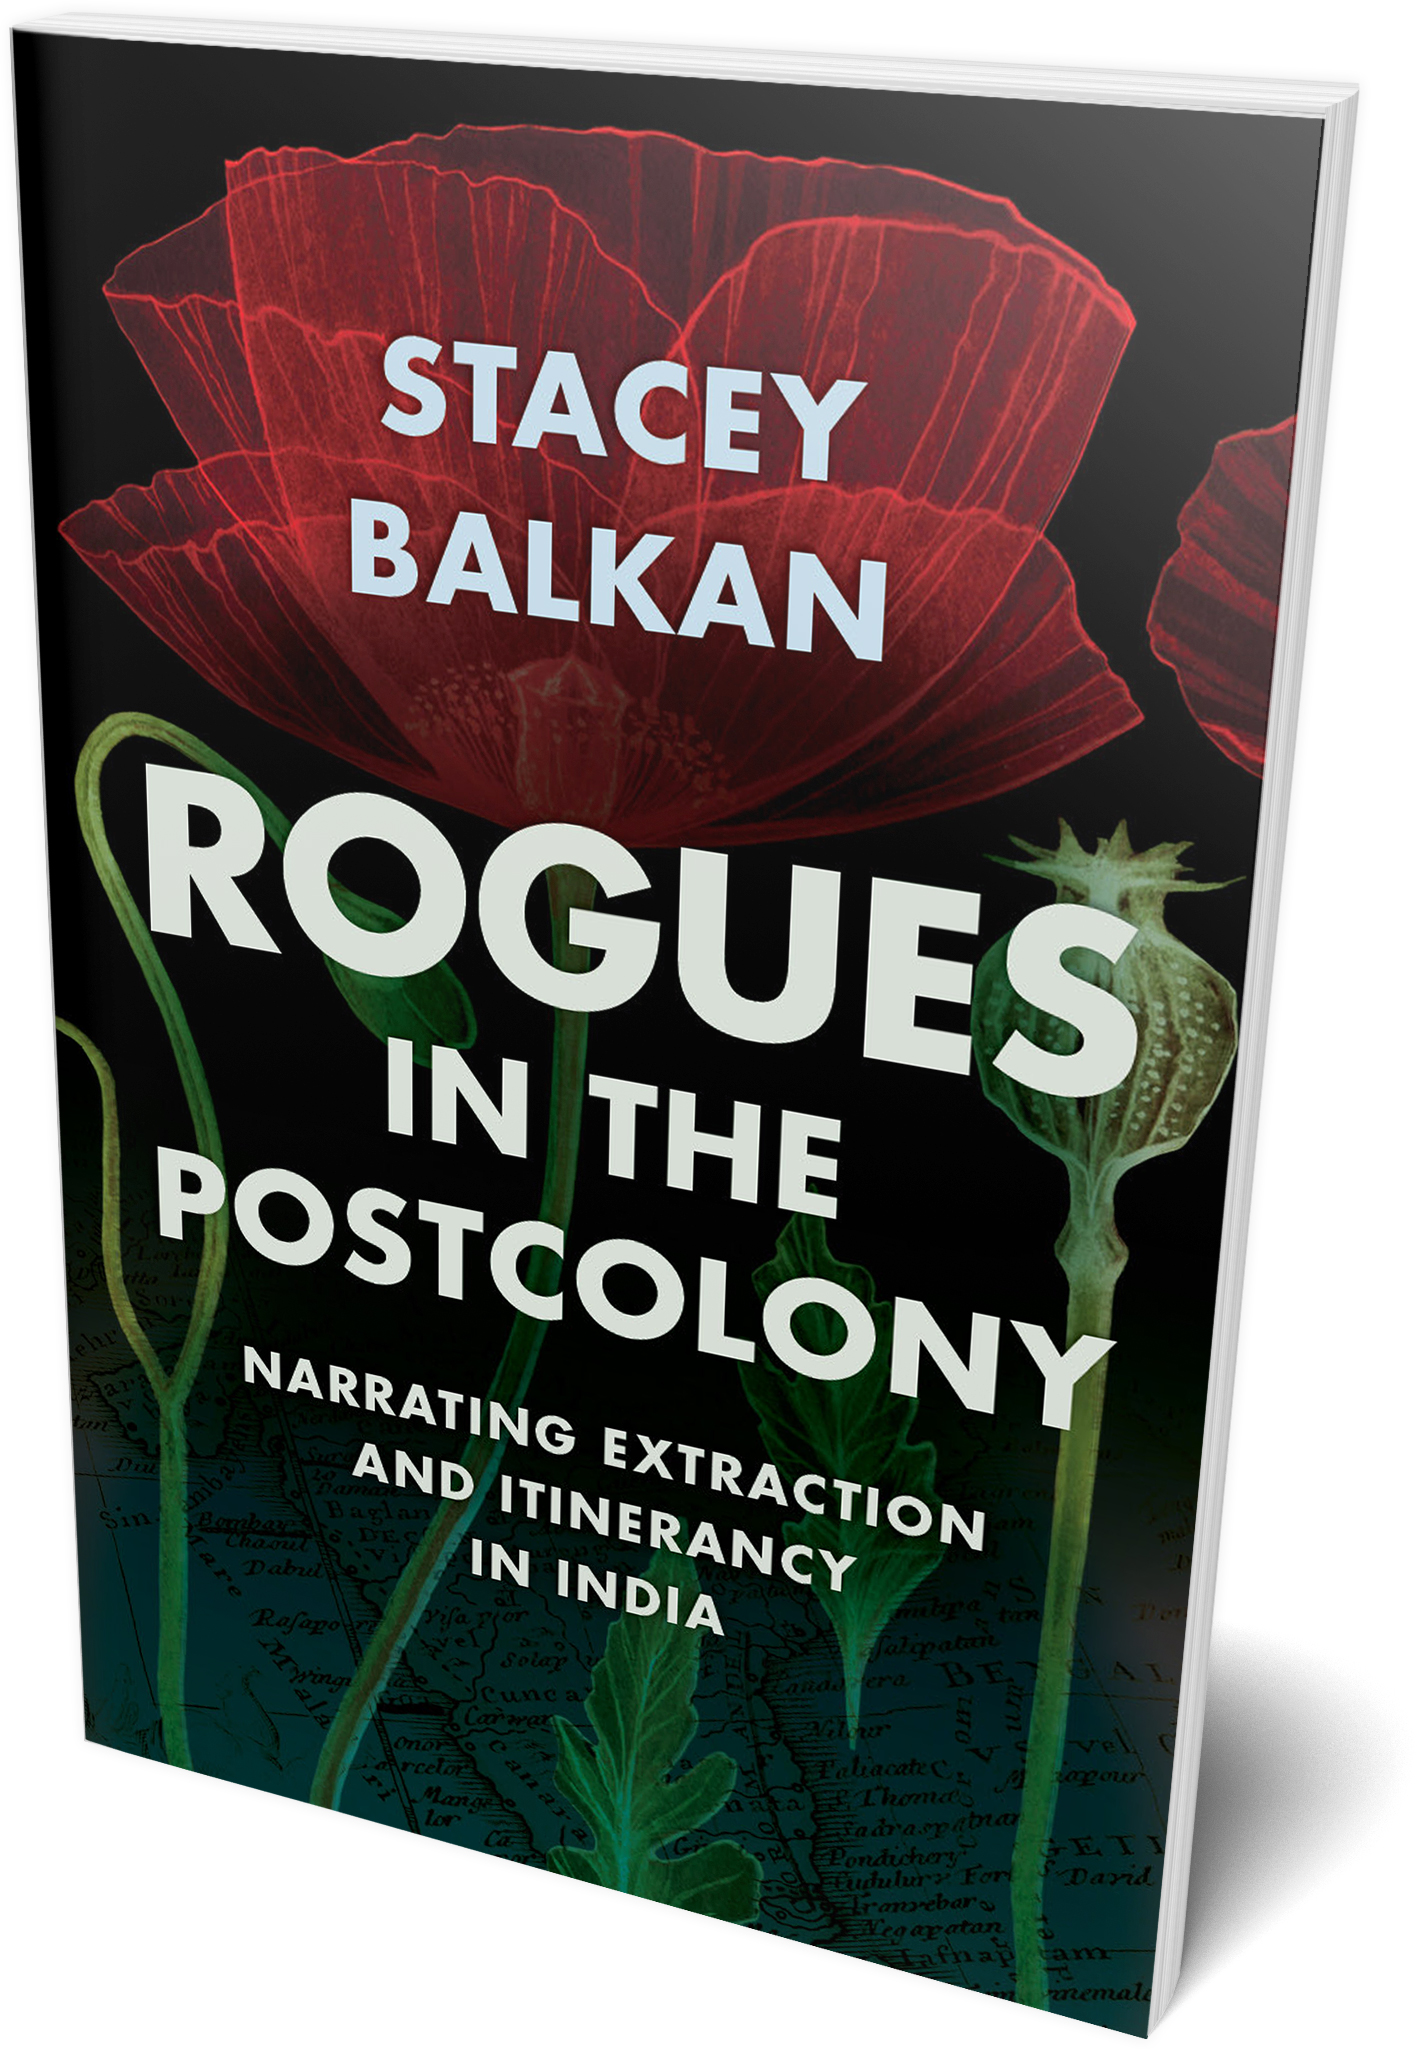 Balkan's Rogues in the Postcolony